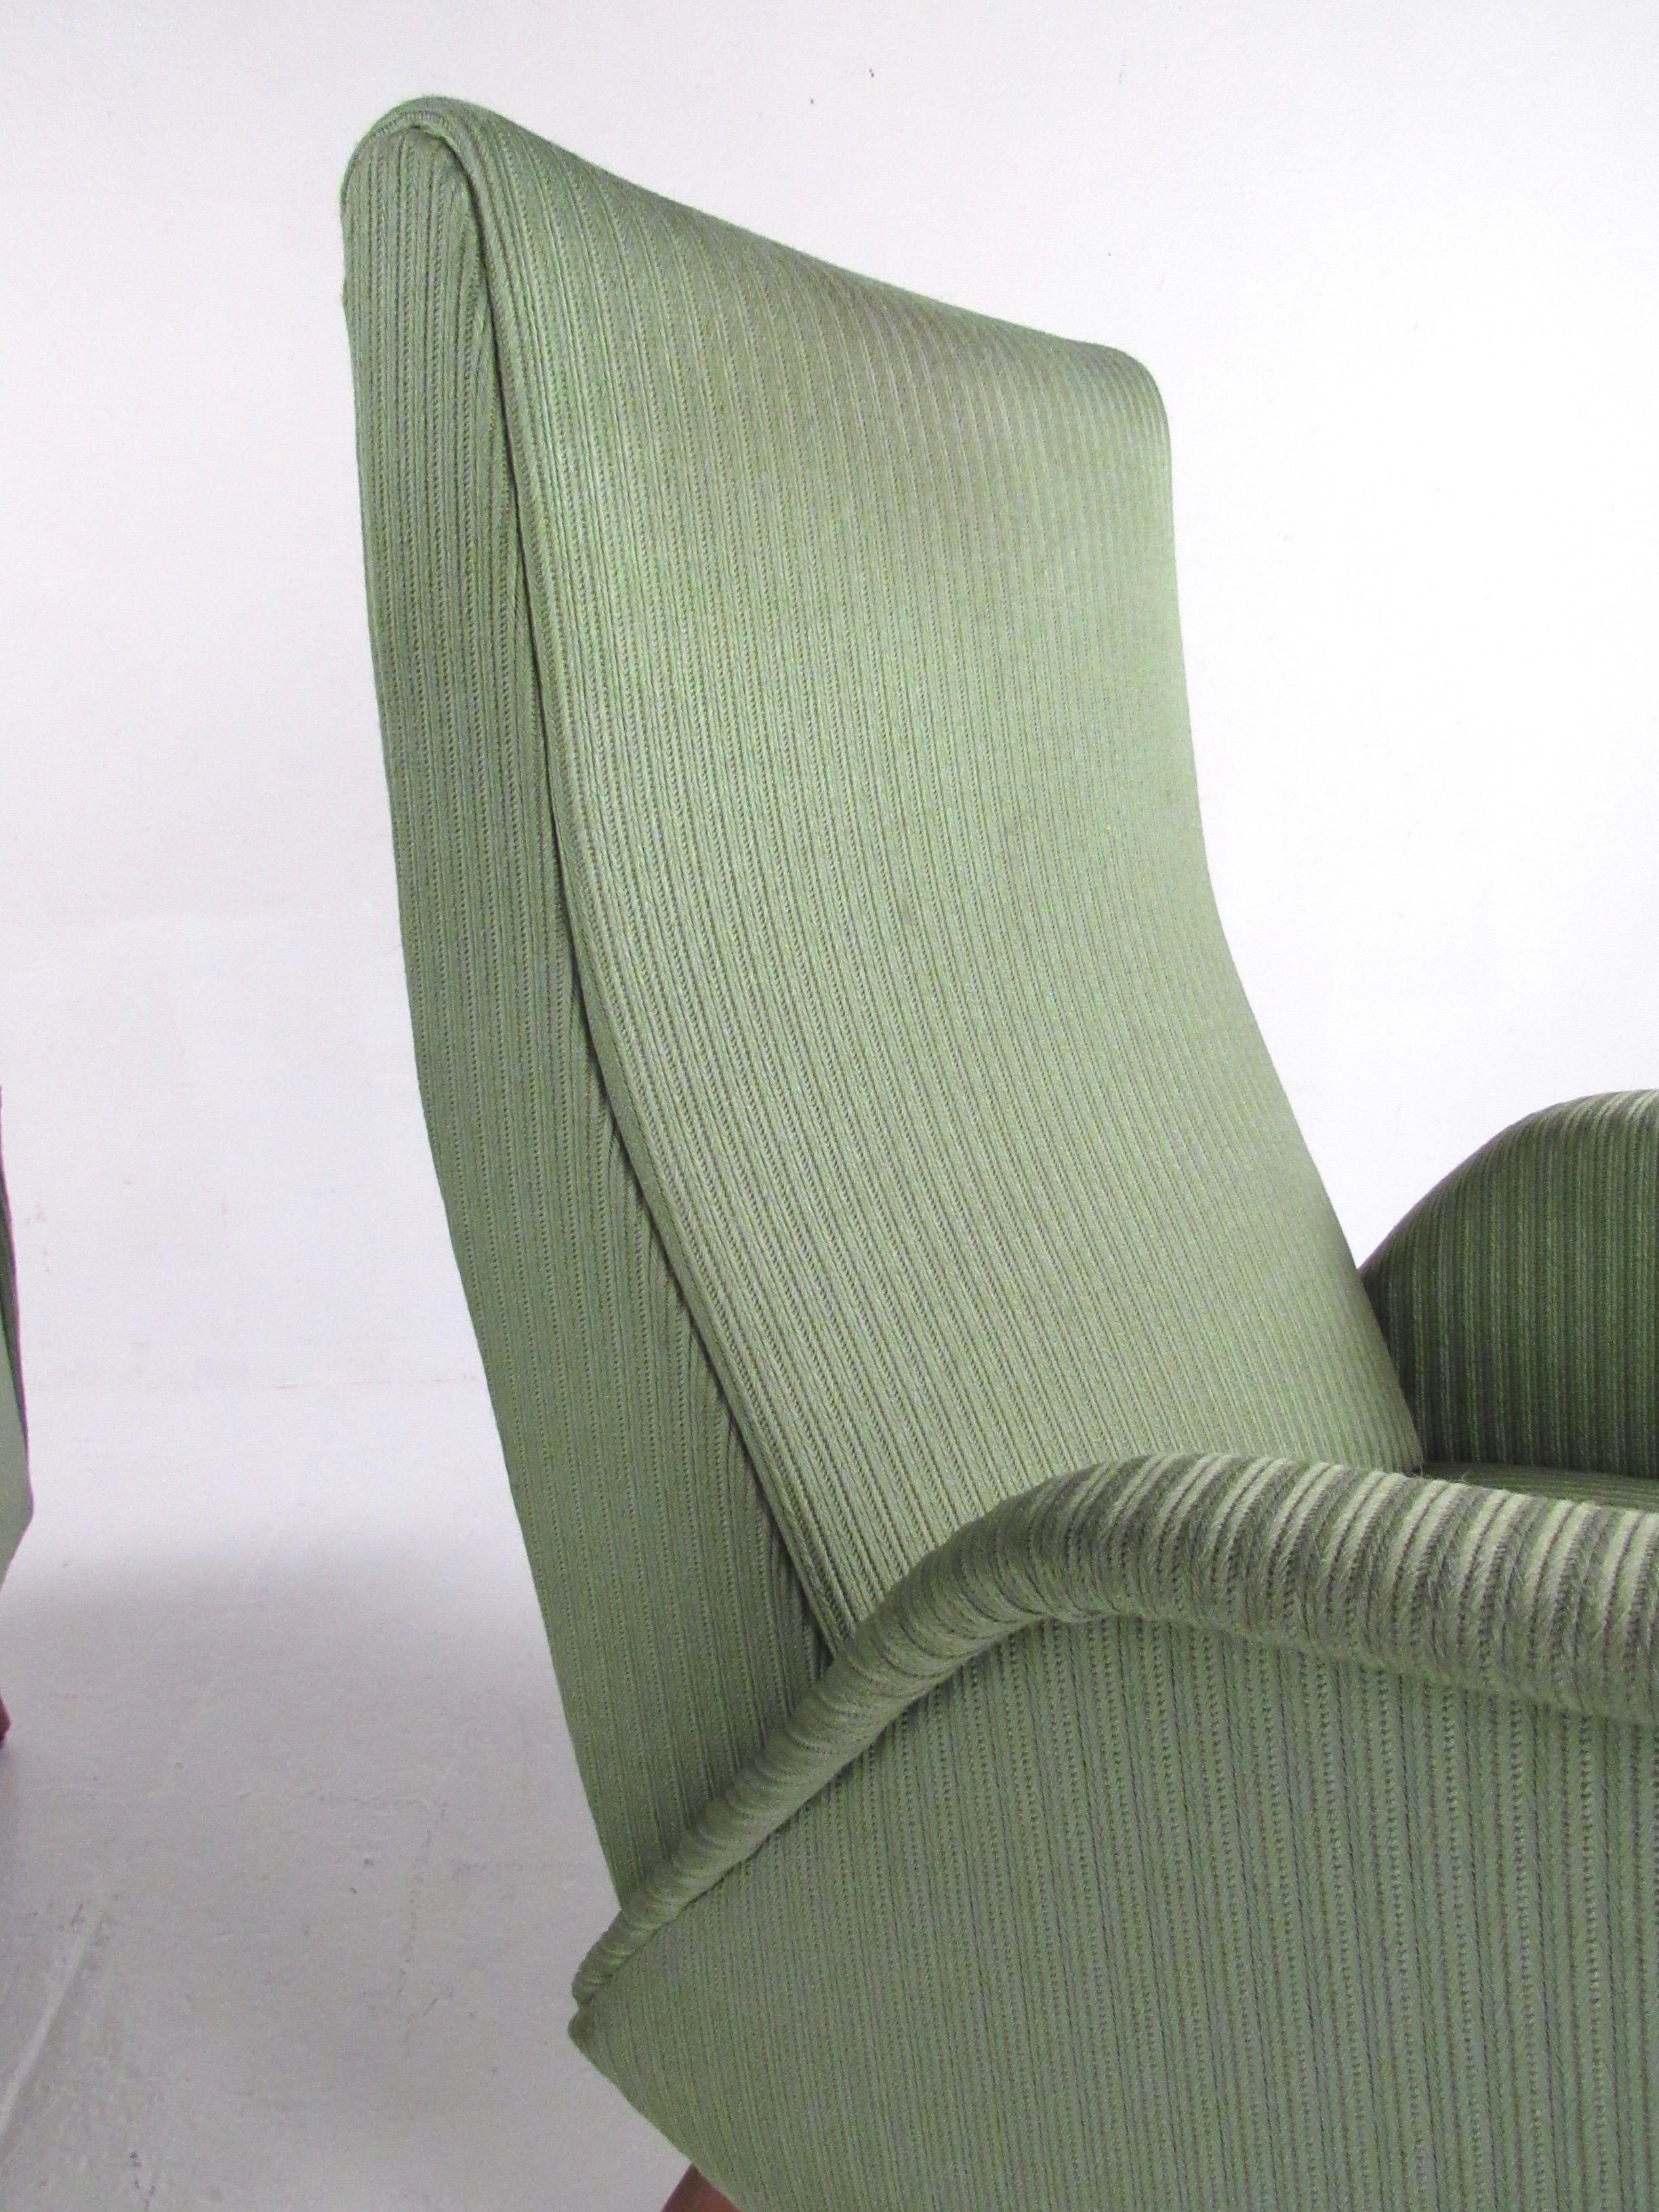 Pair of Italian Moderne Lounge Chairs after Marco Zanuso 1